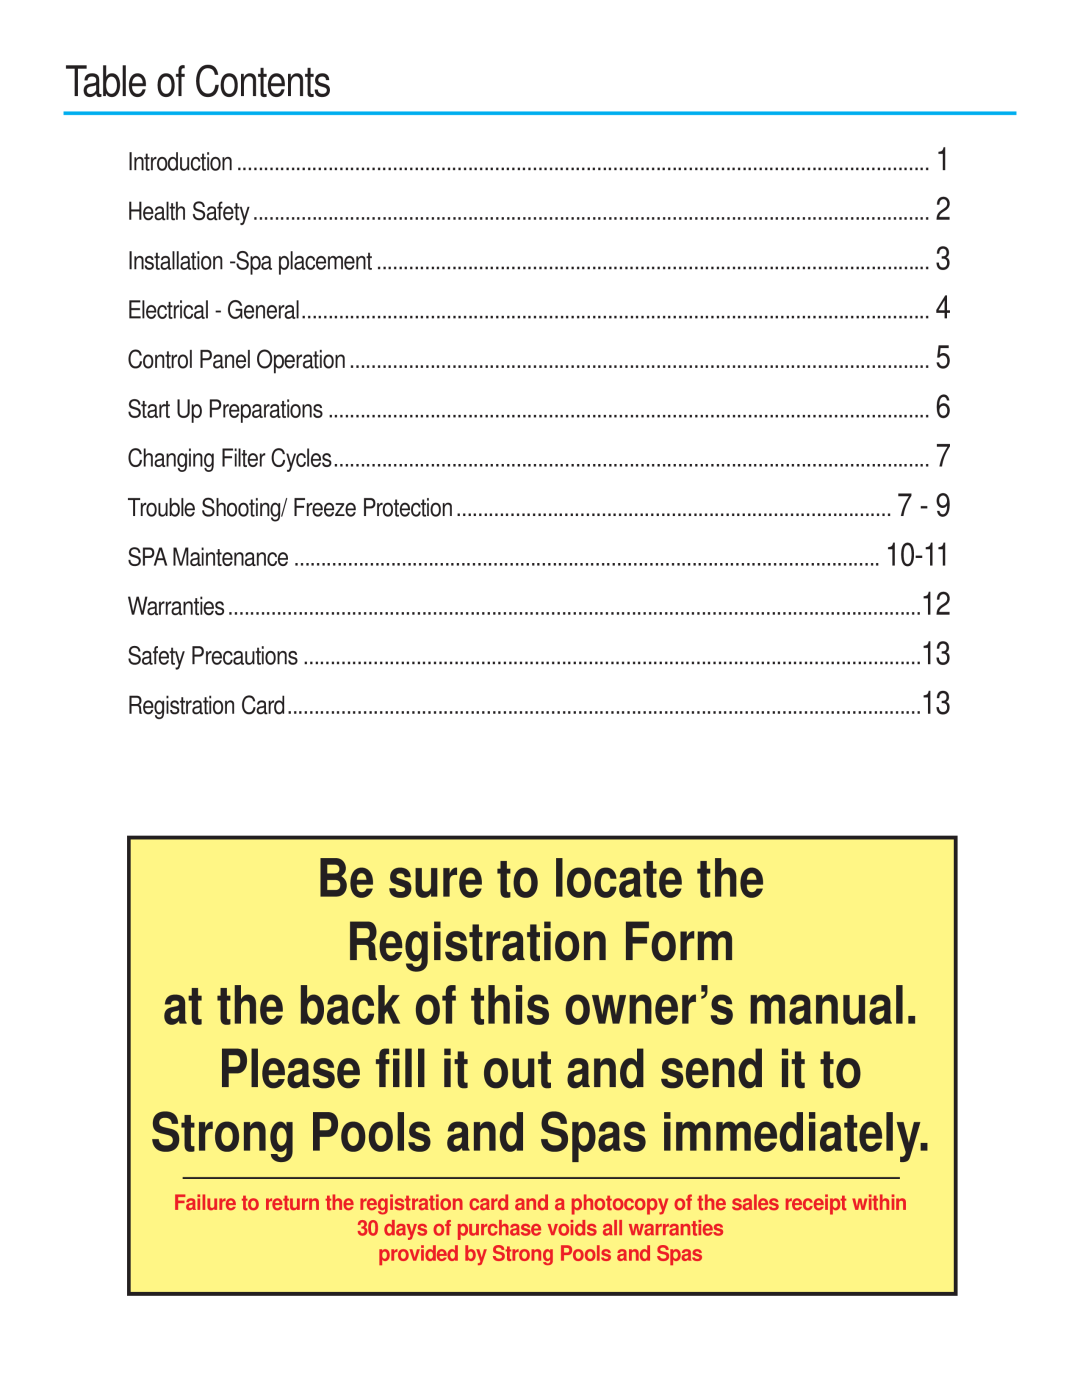 Strong Pools and Spas Victory Spa owner manual Table of Contents, Be sure to locate the Registration Form 